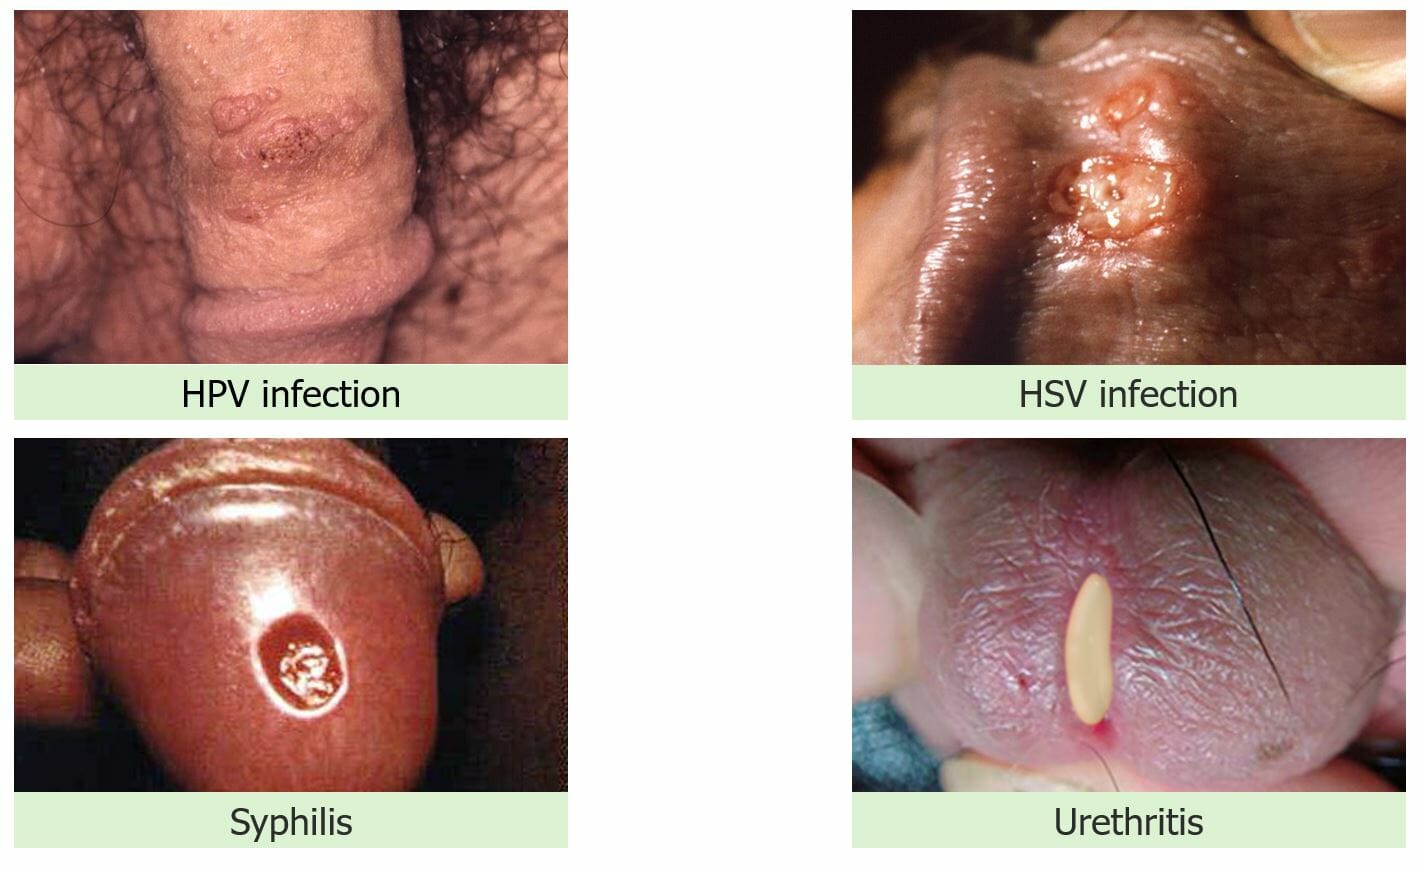 Physical examination findings with stis